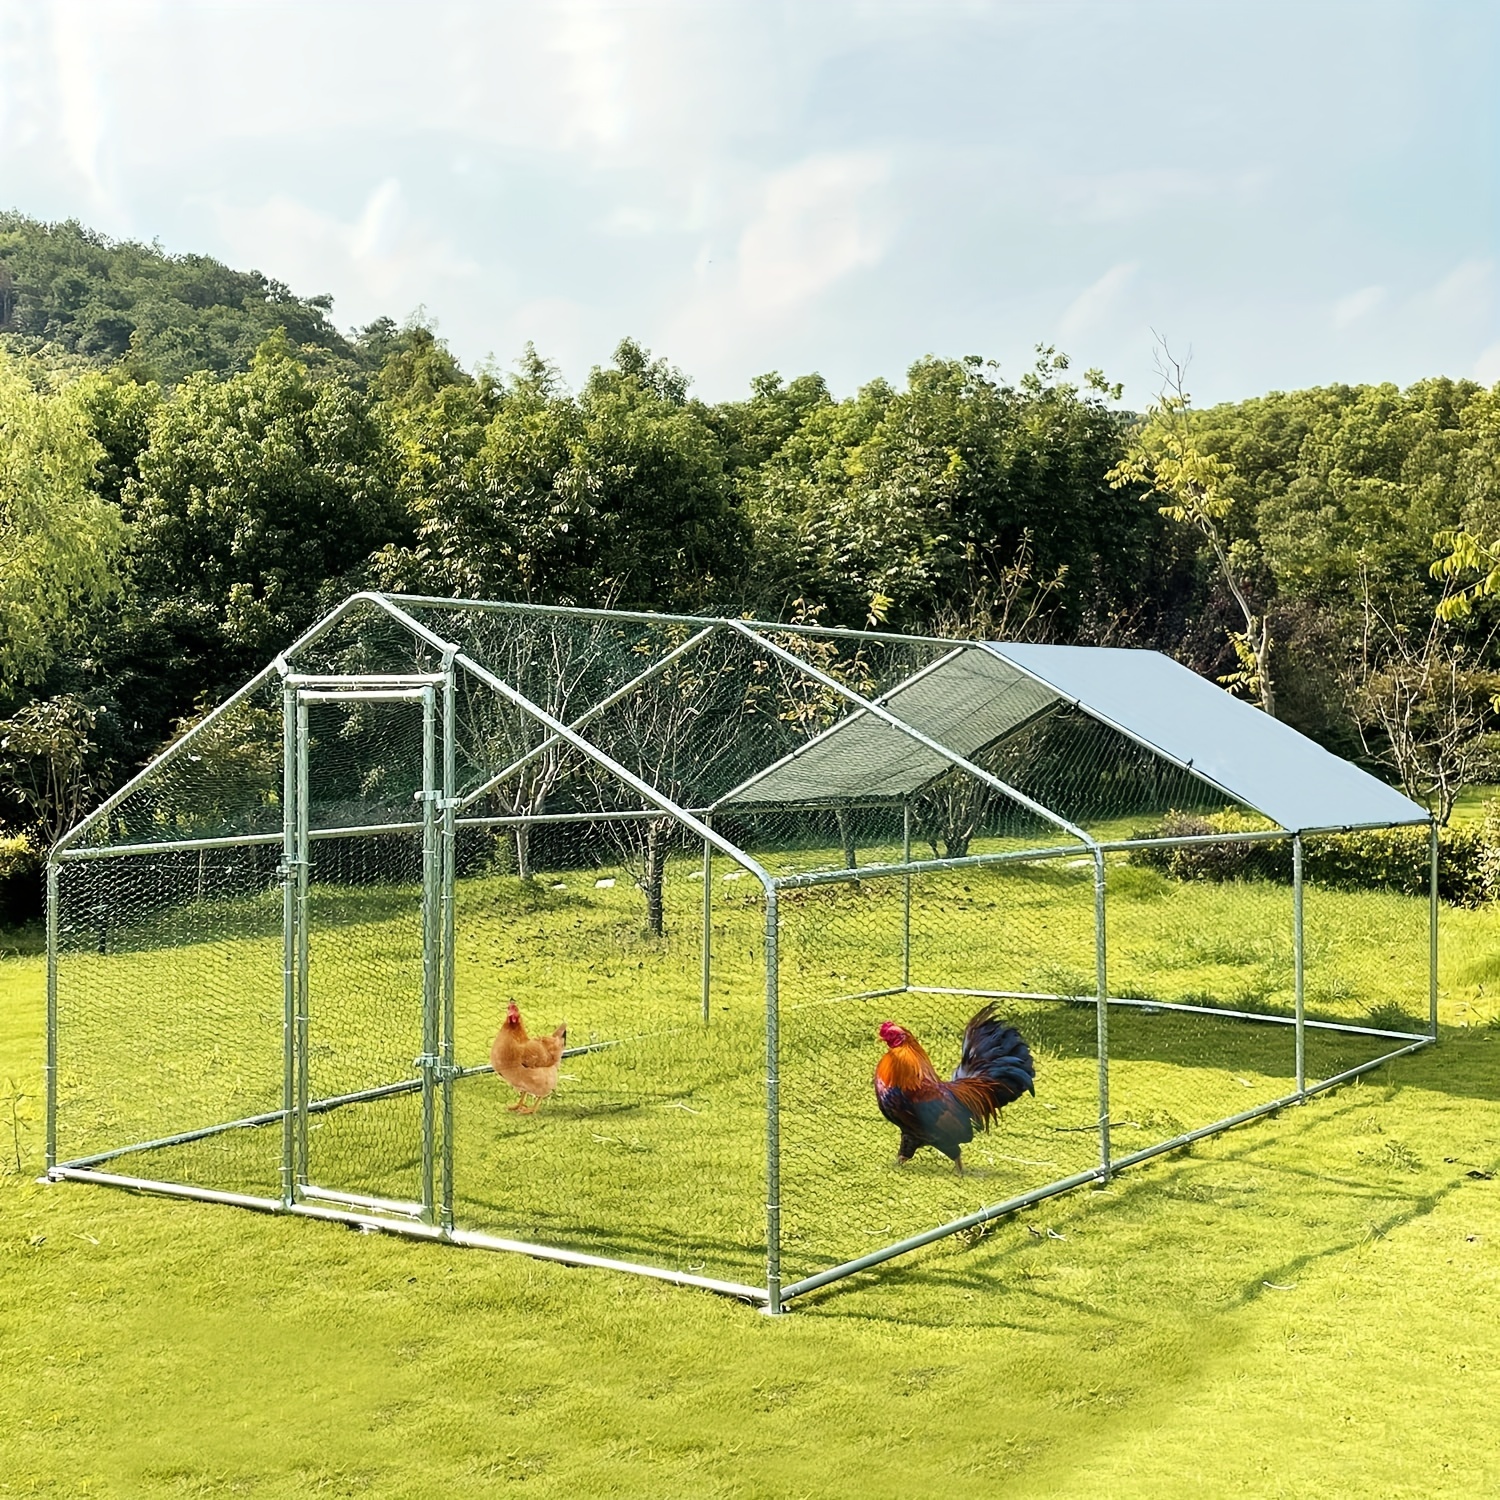 

Large Metal Chicken Coop Walk-in Poultry Cage Pen Dog Kennel With Waterproof And Anti-ultraviolet Cover For Outdoor Farm Use (9.8' L X 19.7' W X 6.4' H)